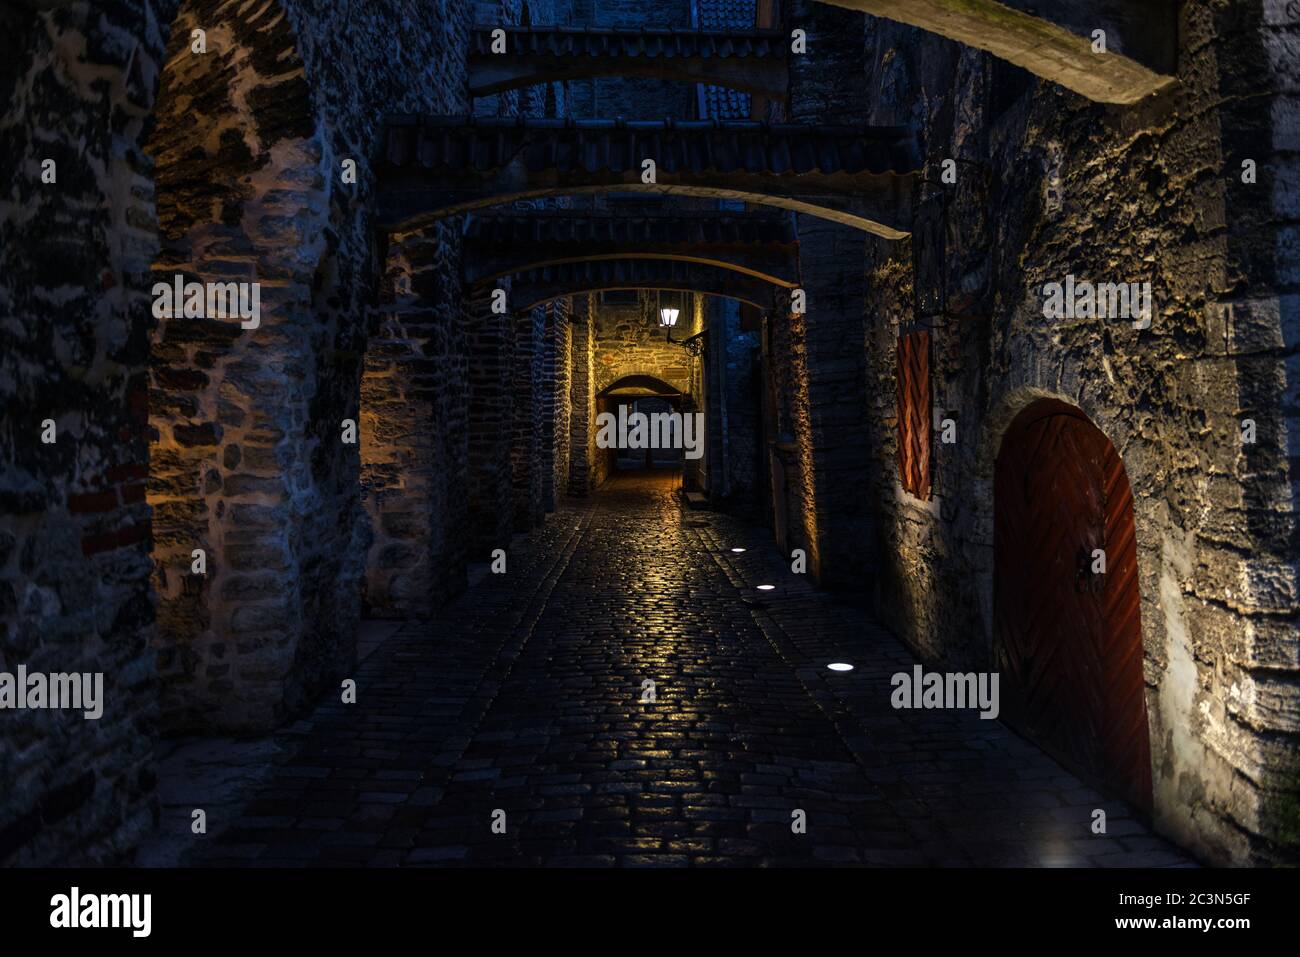 Night view of St. Catherine’s Passage in Tallinn, Estonia, a medieval passage containing some of the old remainings of a Dominican Monastery. Stock Photo